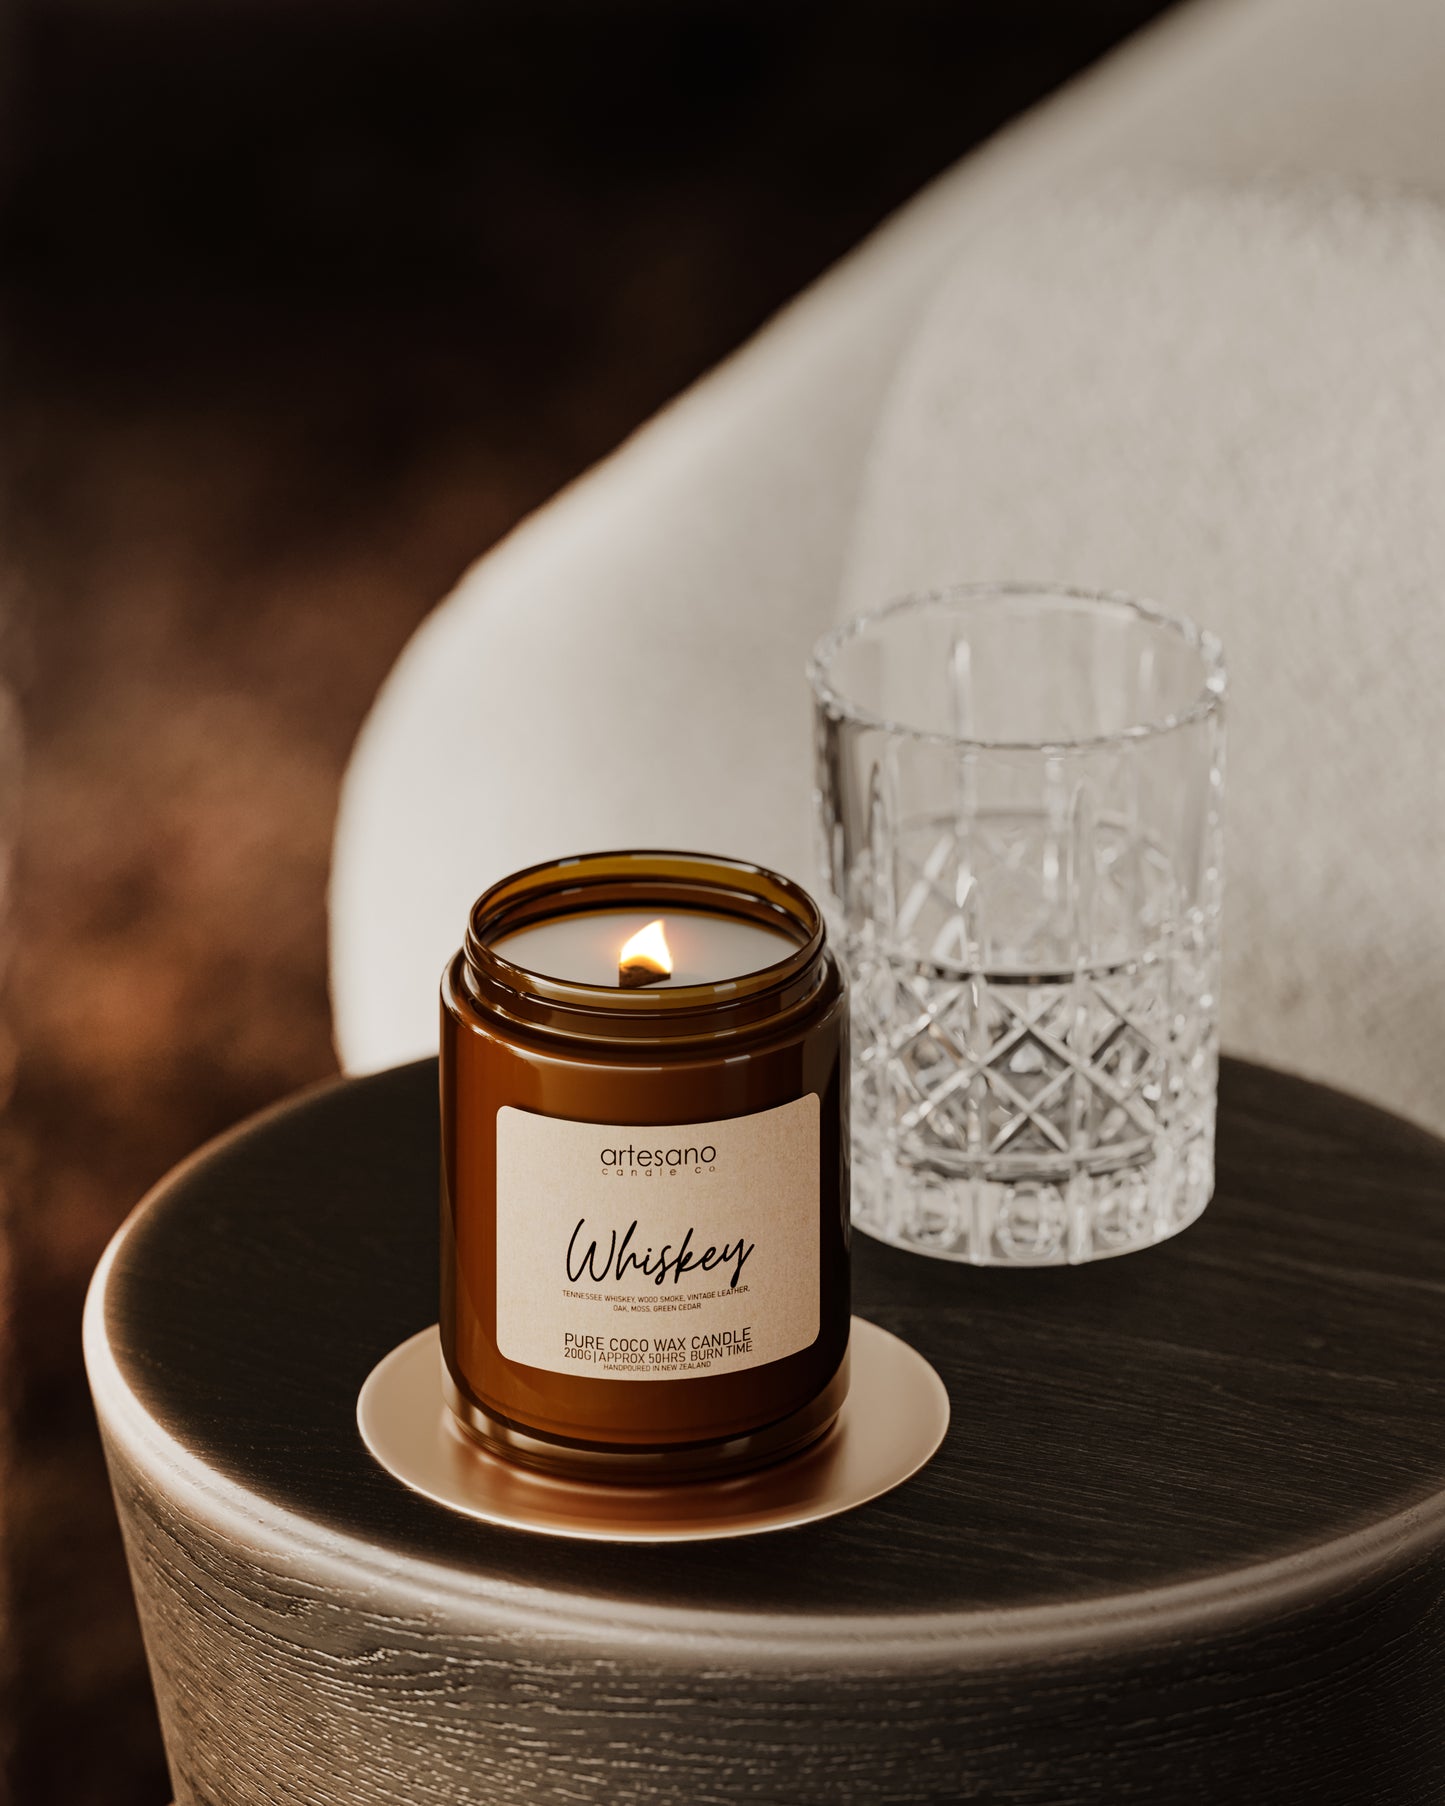 Whiskey - Pure Coco Wax Candle